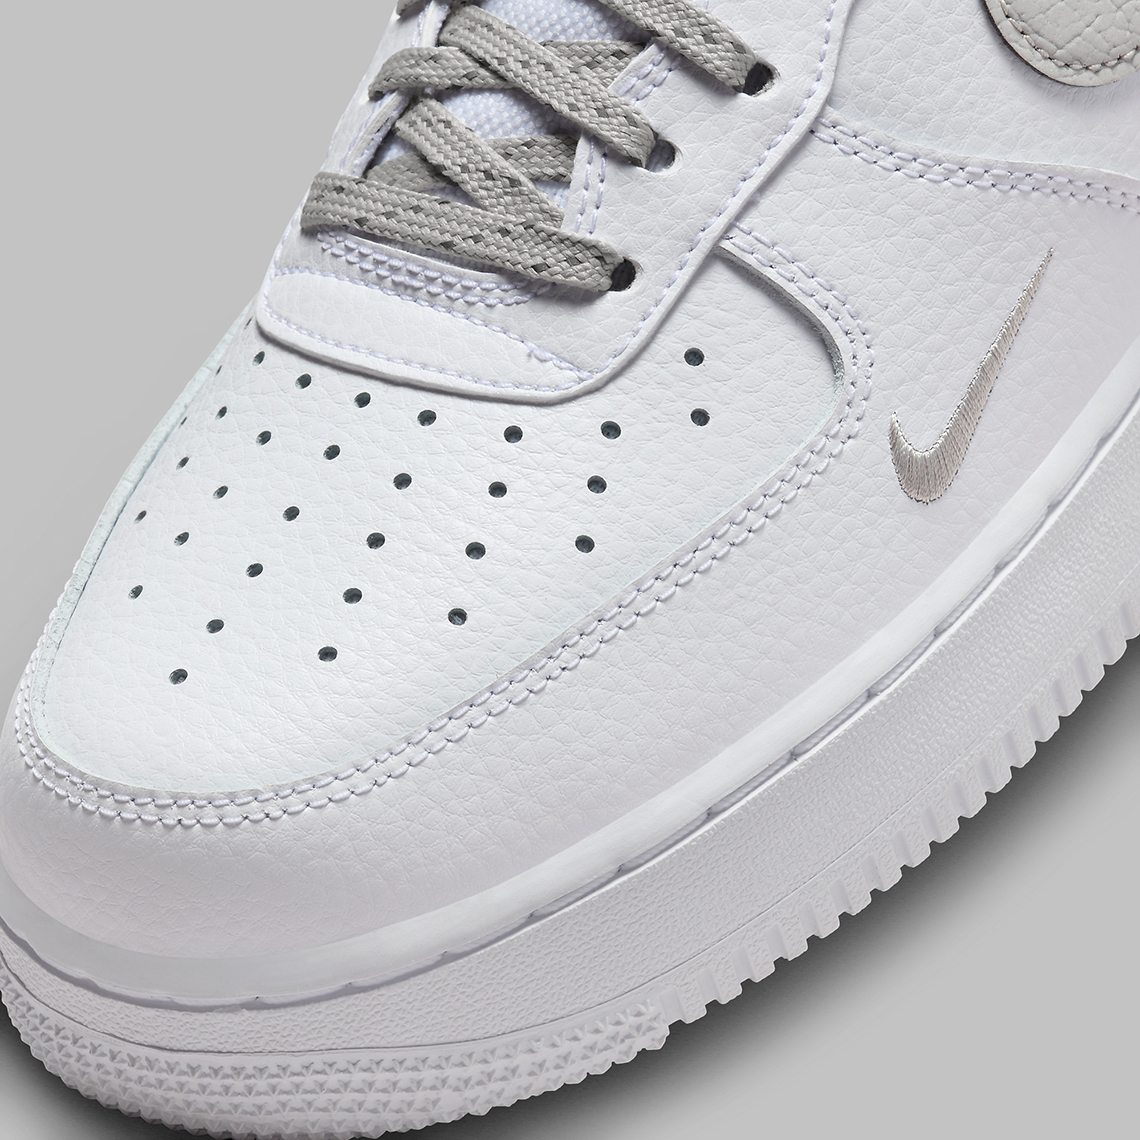 Nike Air Force 1 Low White Grey Reflective Swoosh Fv0388 100 7